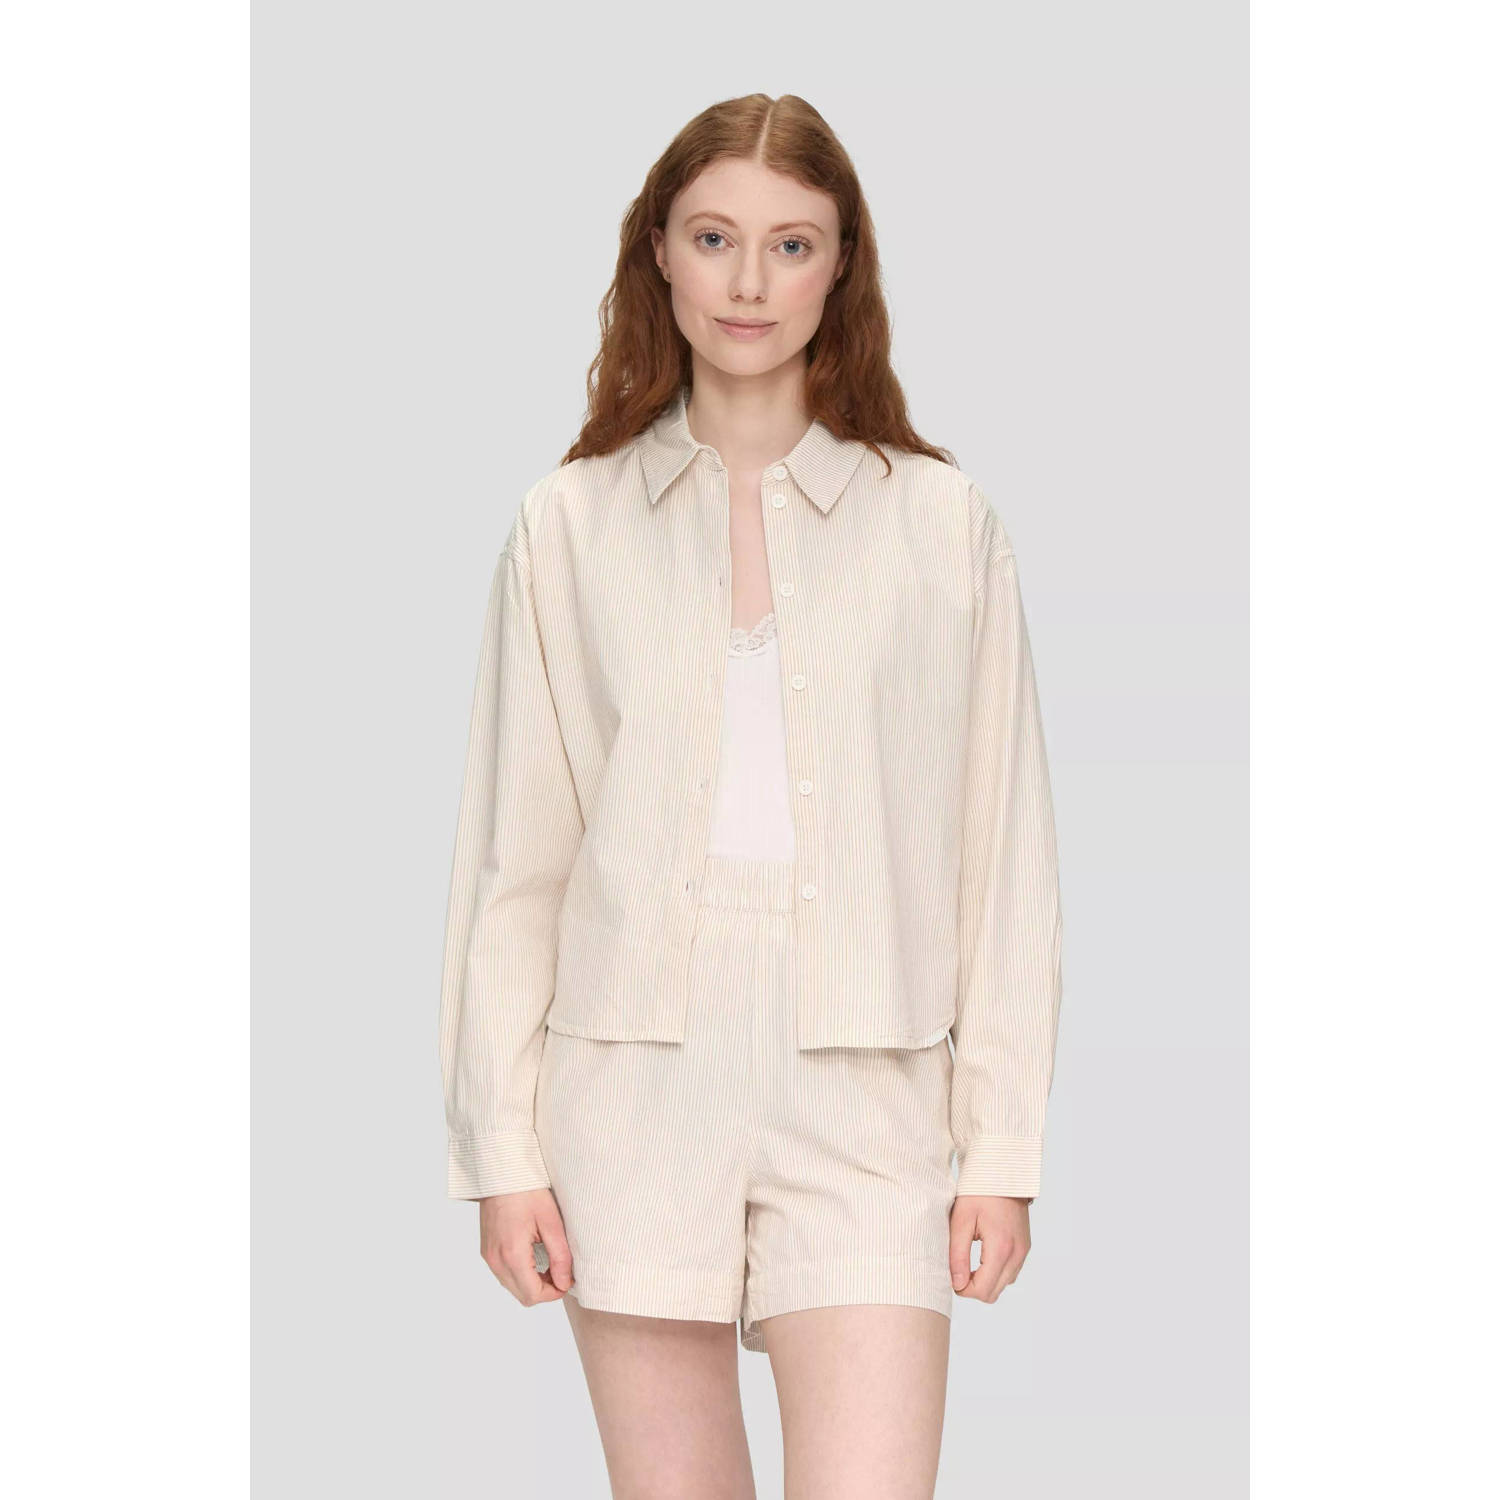 Q S by s.Oliver gestreepte blouse beige ecru